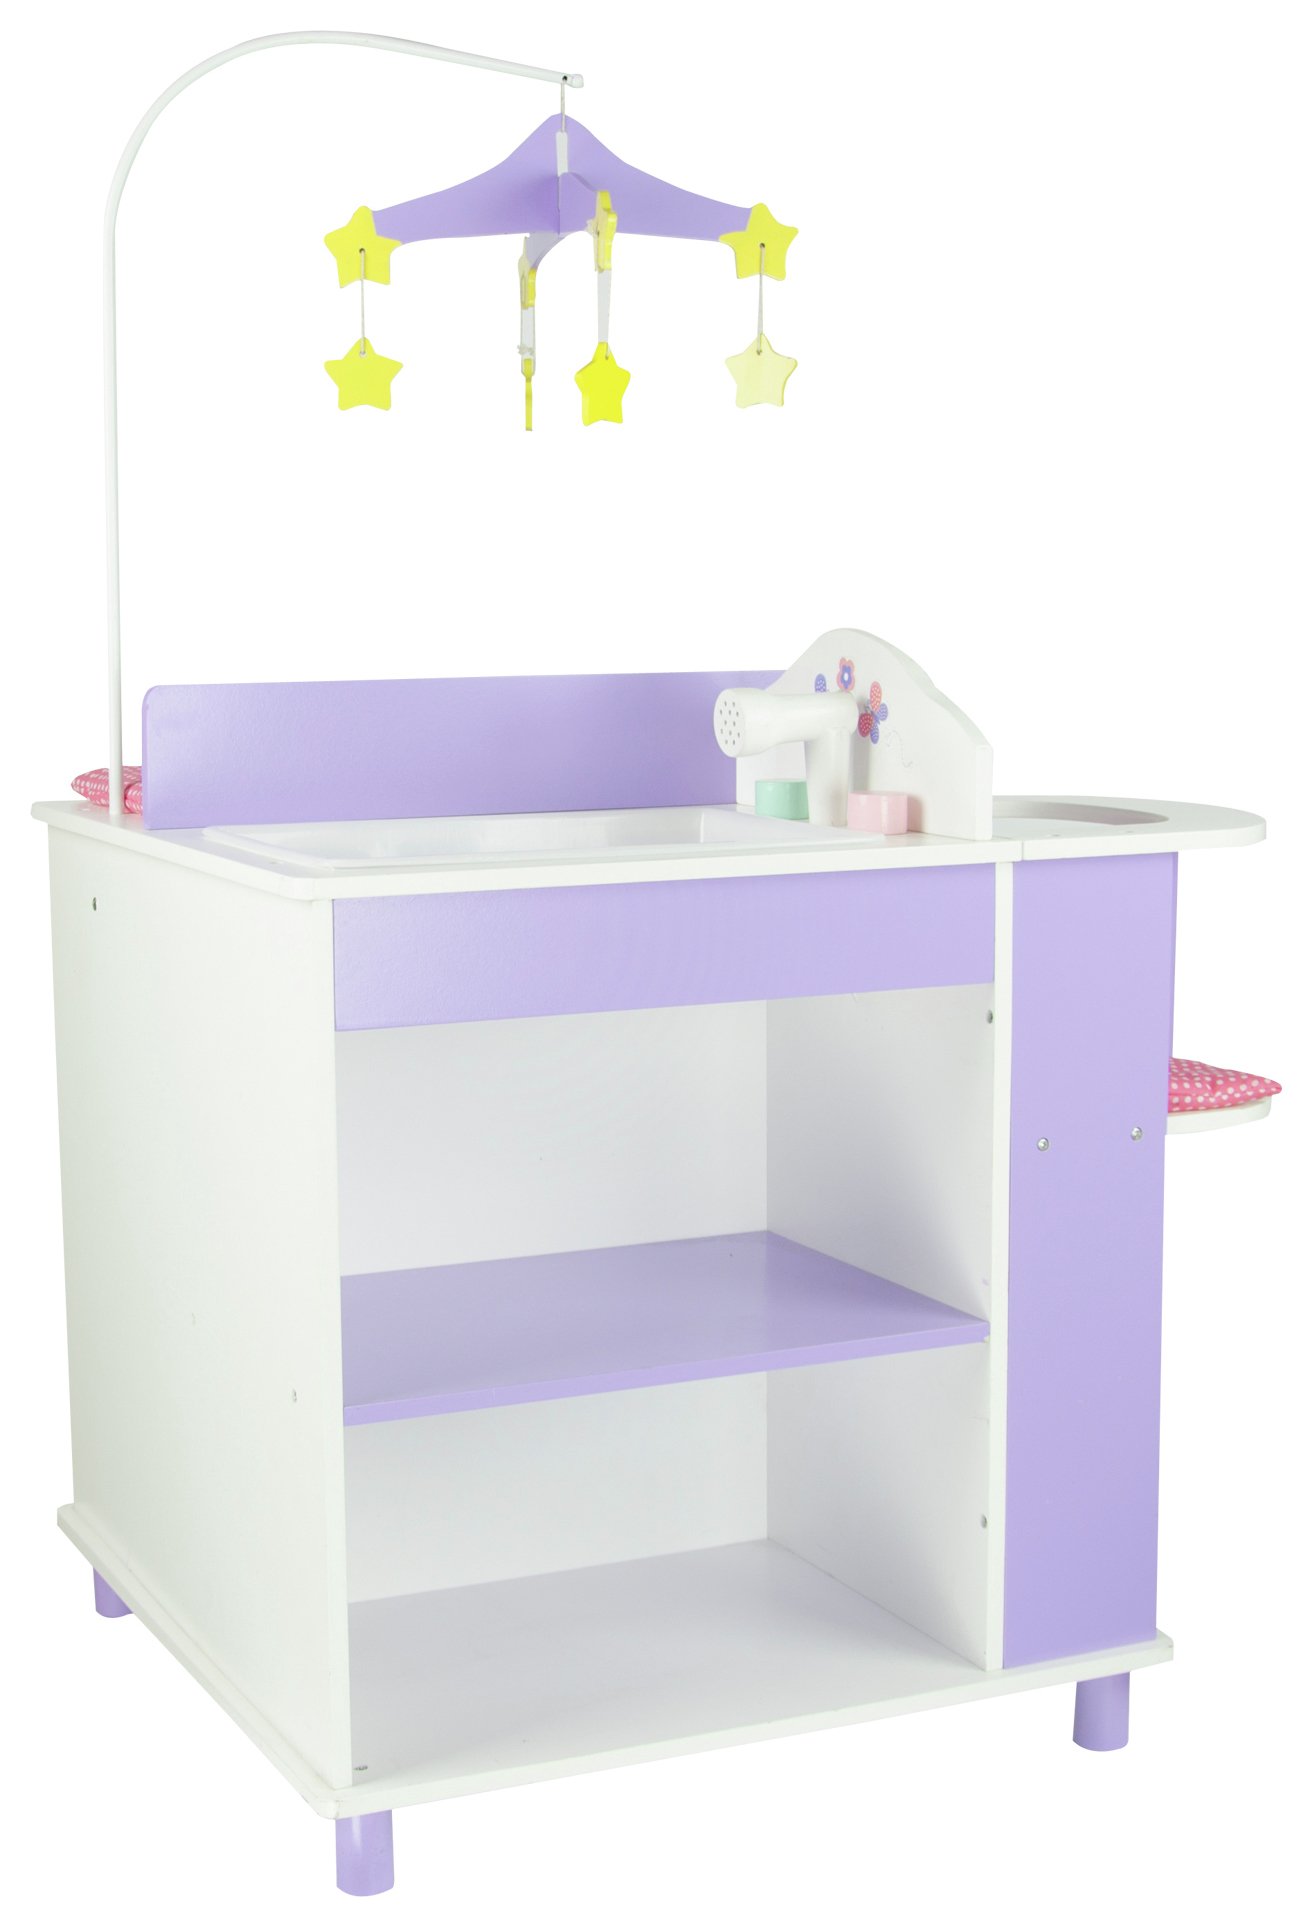 Olivias Little World Baby Change Station Storage Dolls Accs review